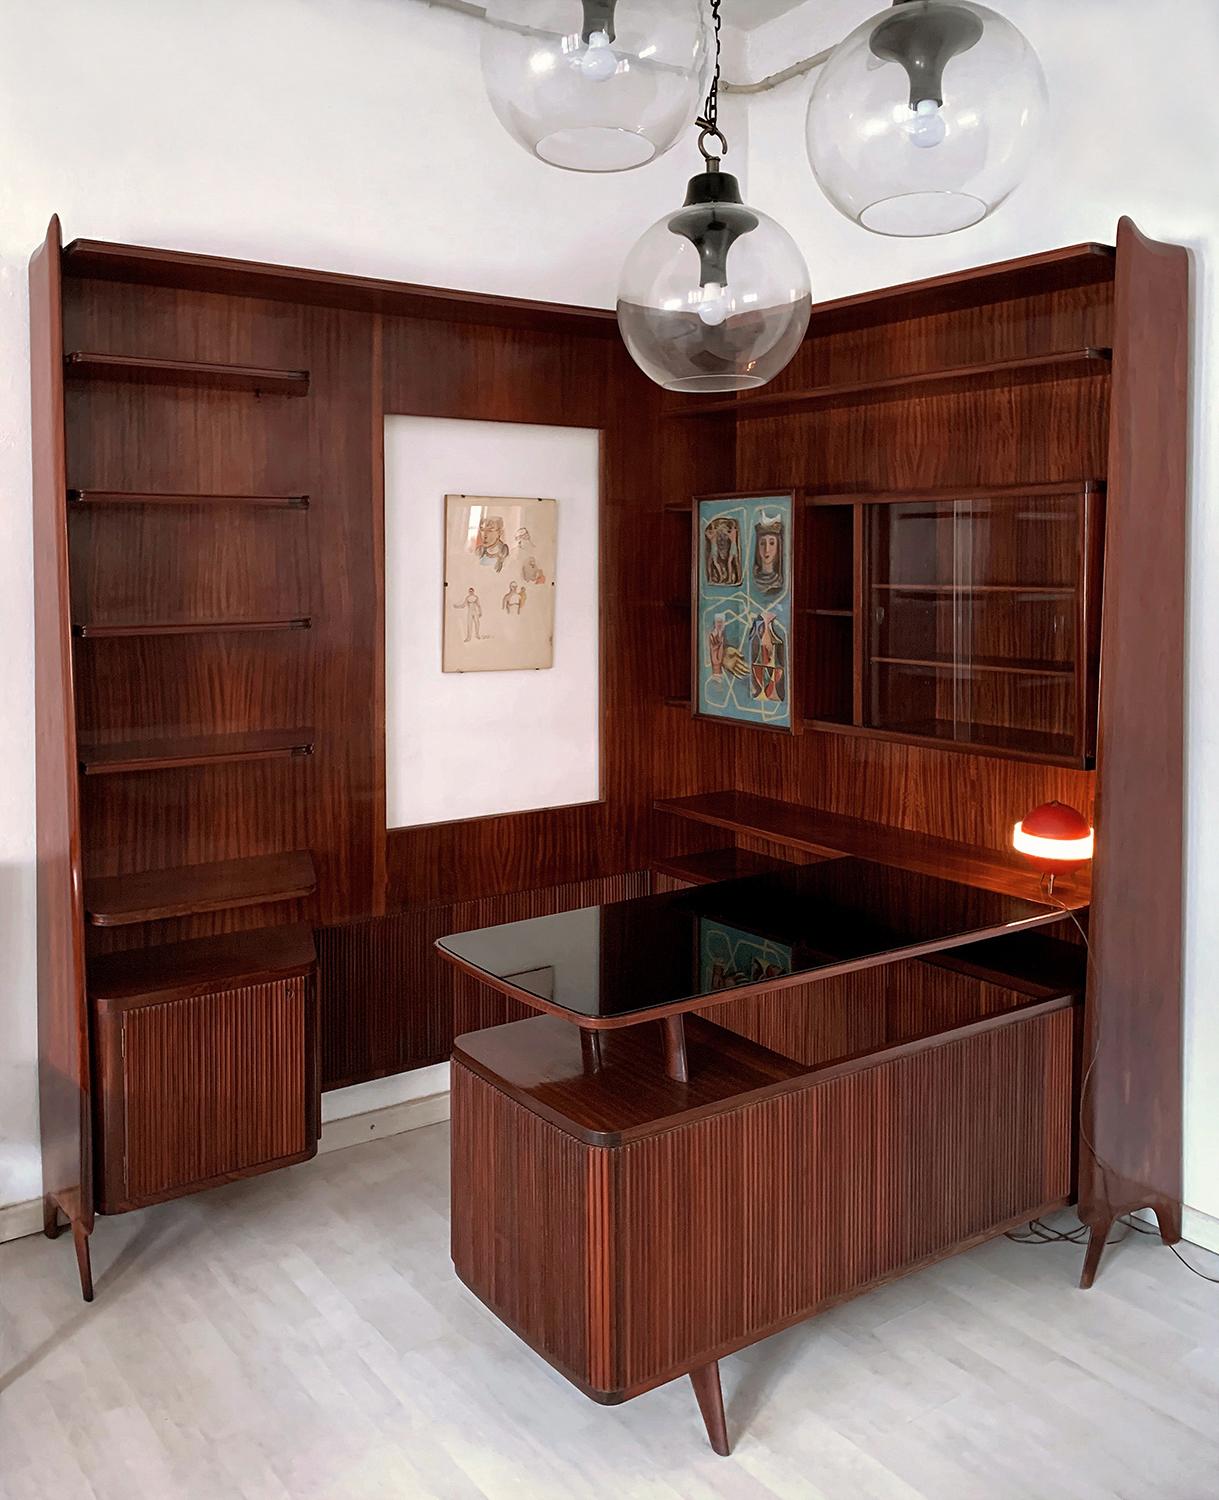 Amazing Italian corner Bookcase with Desk, produced in the 1950s and very well designed, probably by one of the most important Italian designers of the period such as Osvaldo Borsani, Vittorio Dassi or Paolo Buffa.

It is a stylish Bookcase designed